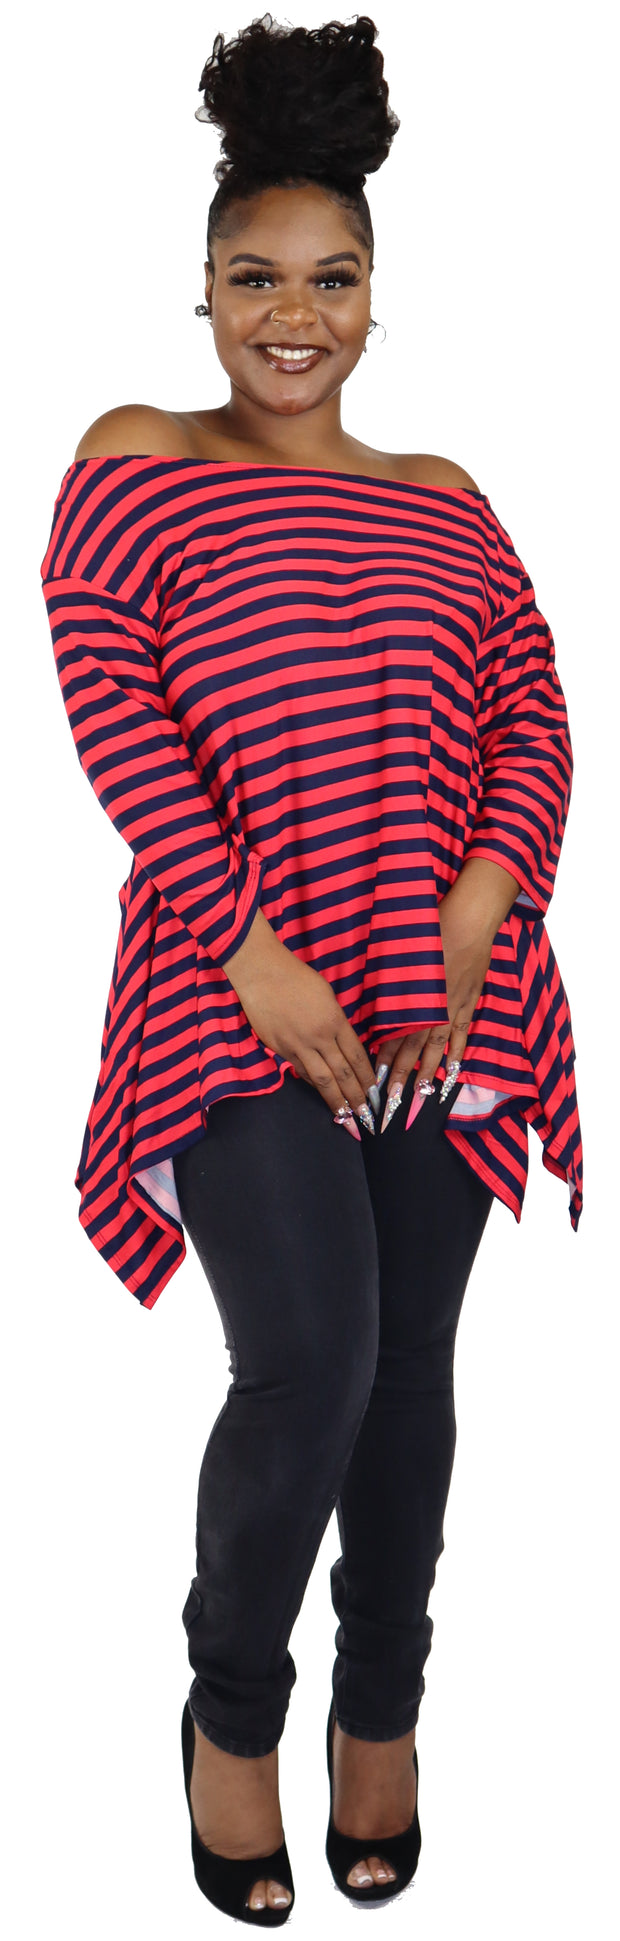 Dare2bstylish tunic, Striped tunic, Asymmetrical tunic, Lagen look tunic, Plus Size, Off shoulder Tunic, One size tunic, Plus size tunic